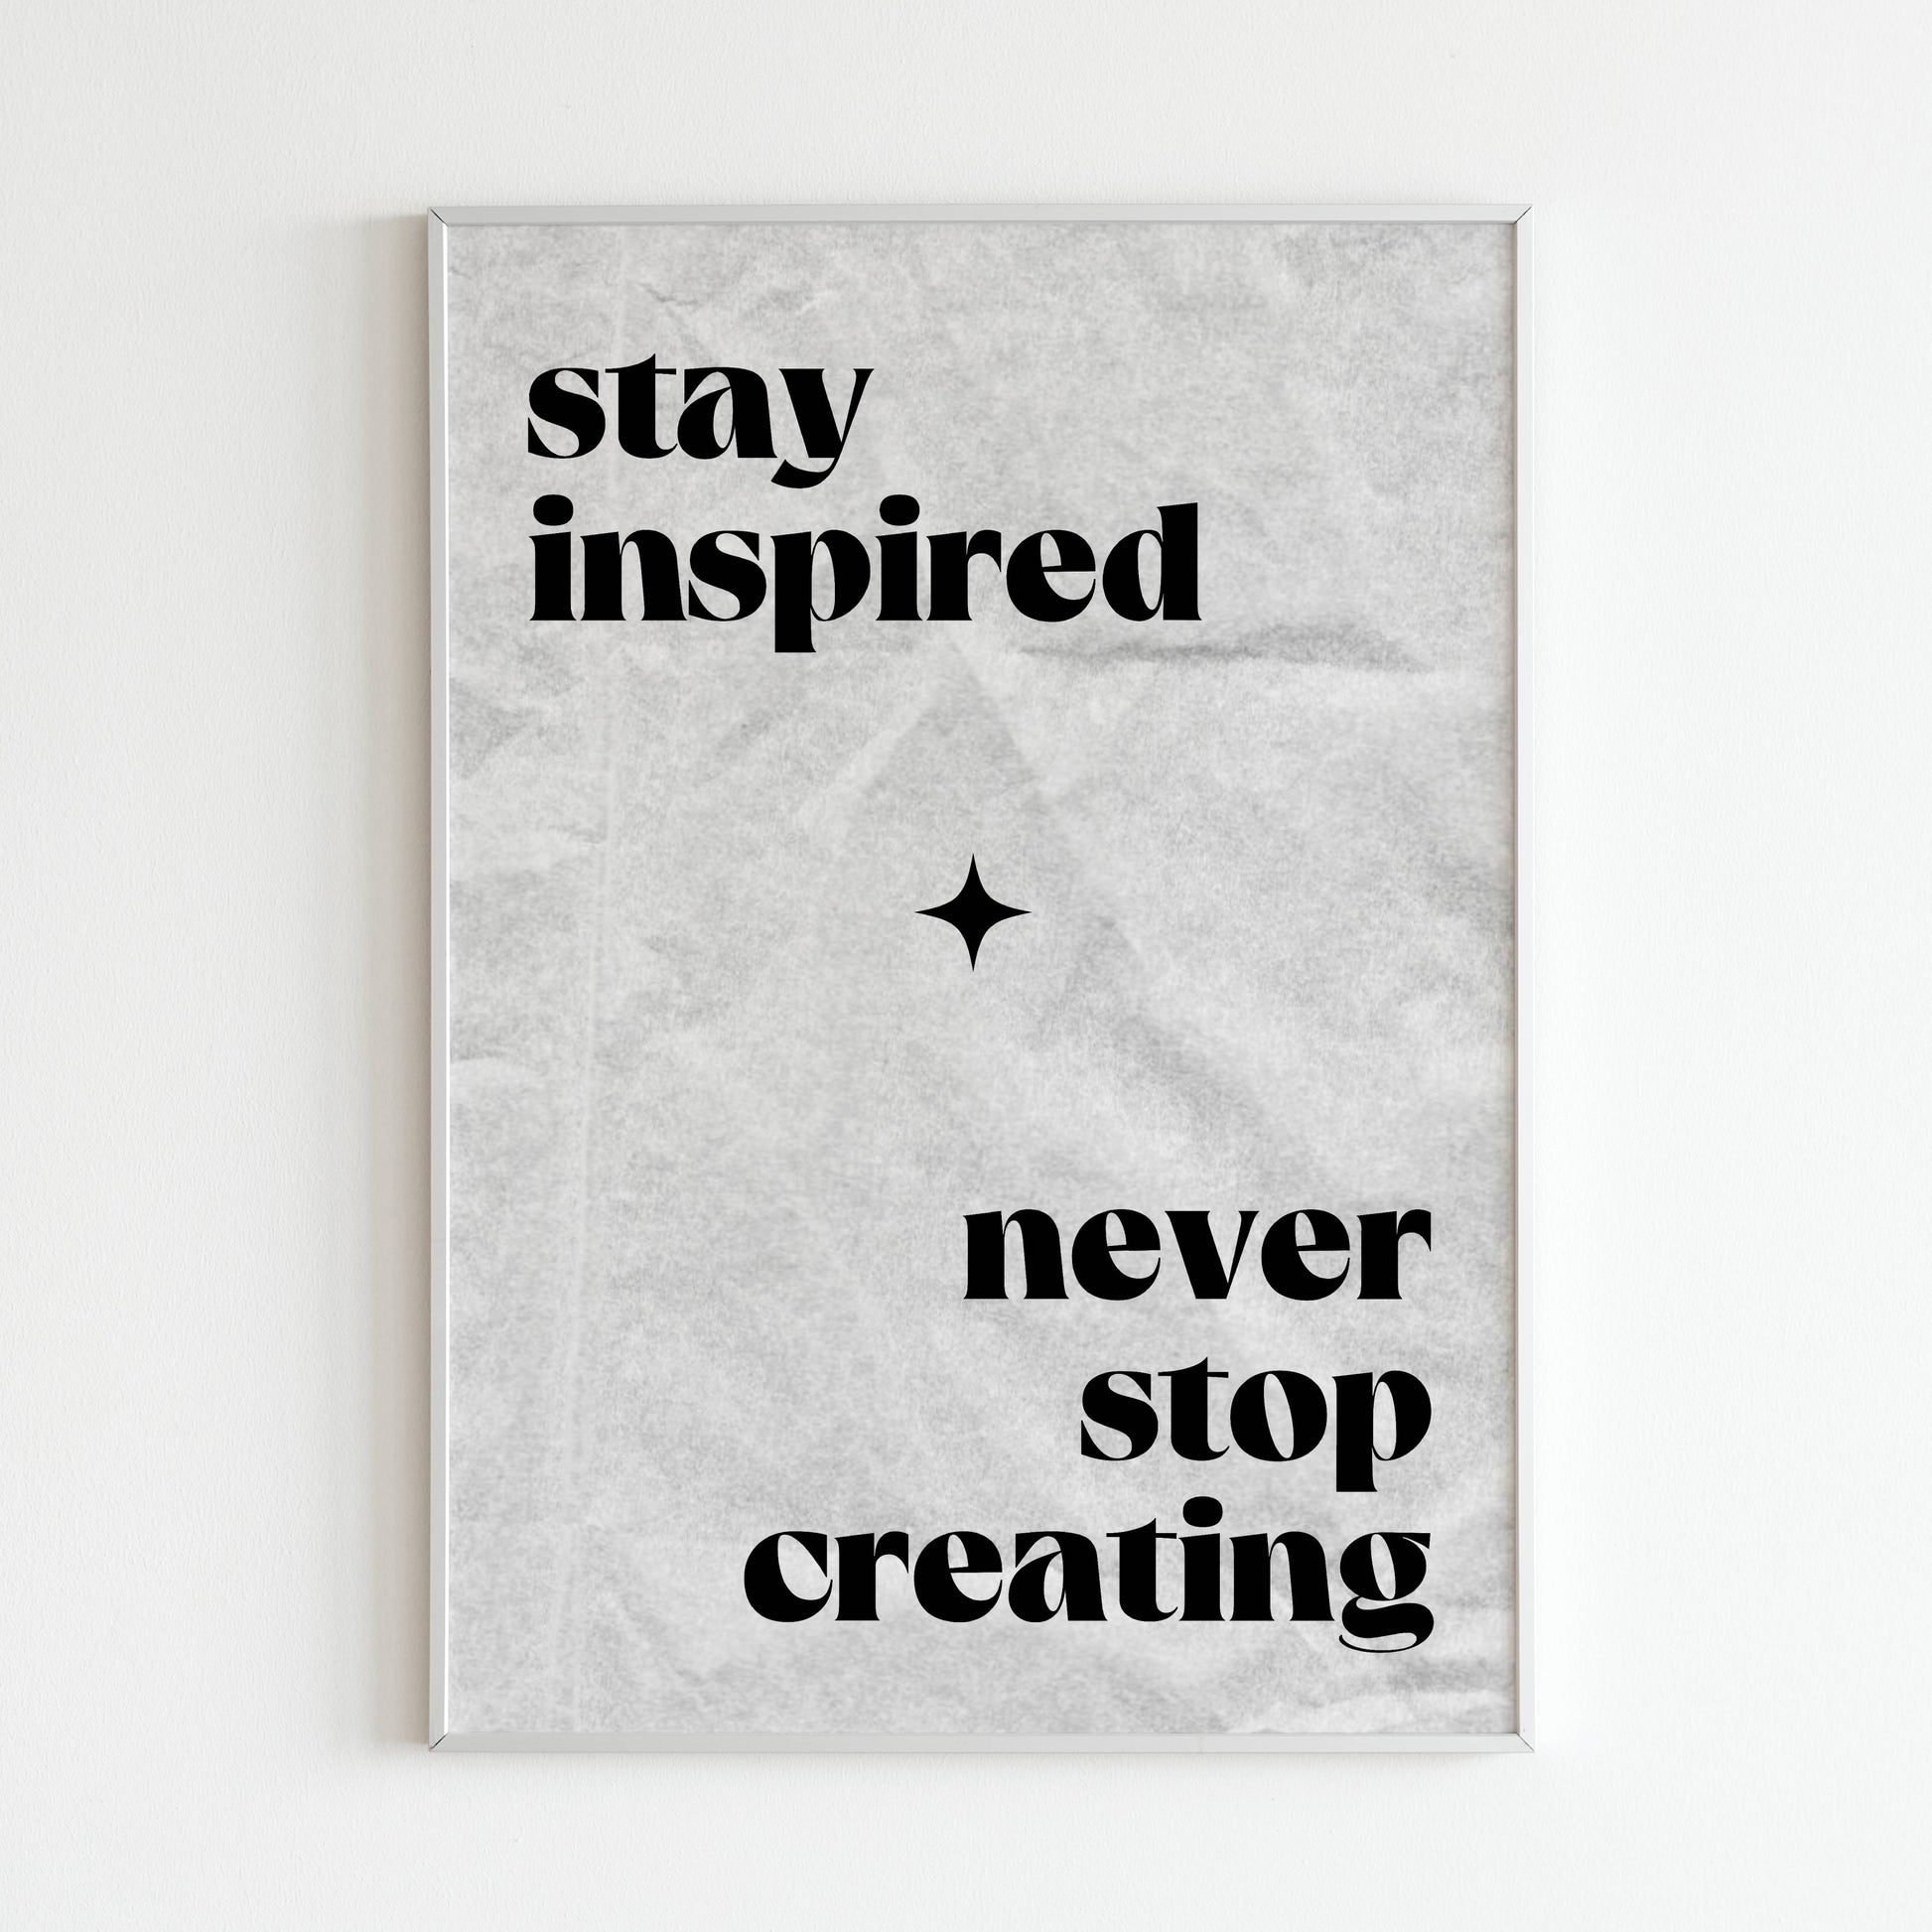 Downloadable inspirational wall art encouraging continuous creativity